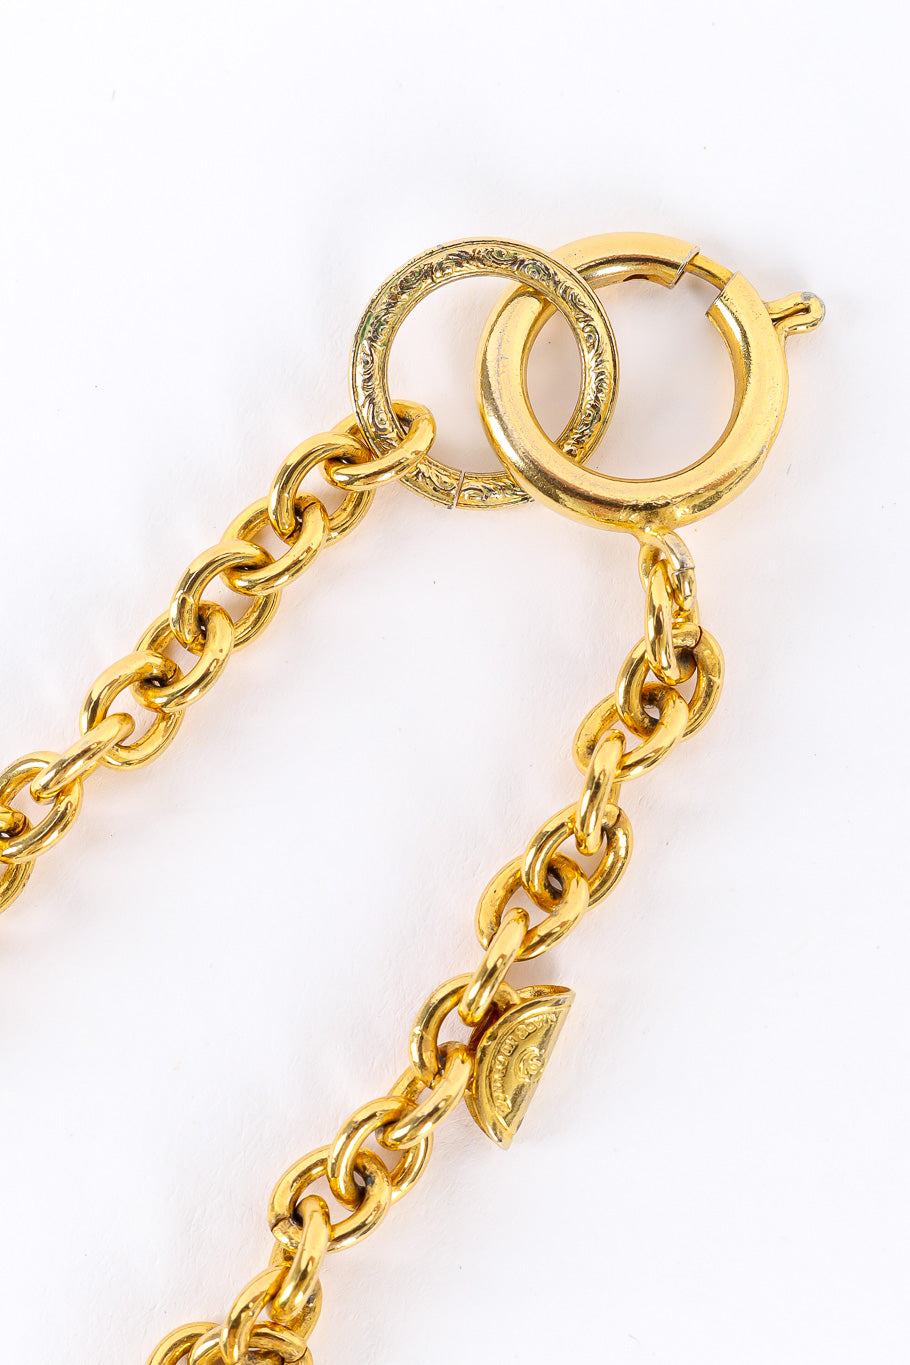 Vintage Chanel Mademoiselle Charm Necklace ring clasp @recessla